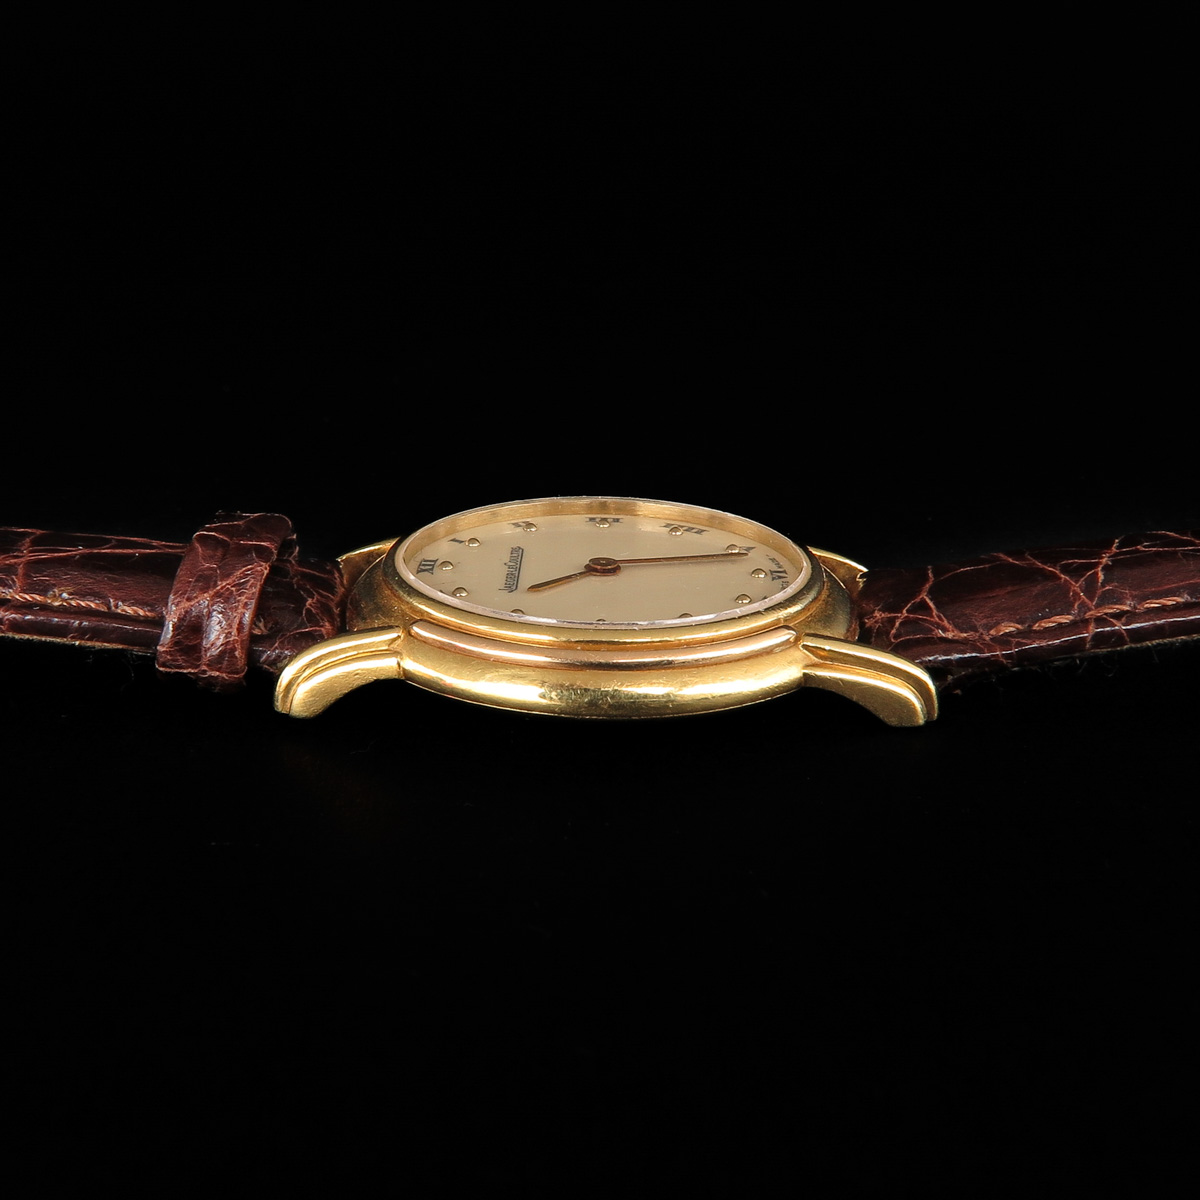 A Ladies Jaeger-LeCoultre Watch - Image 6 of 8